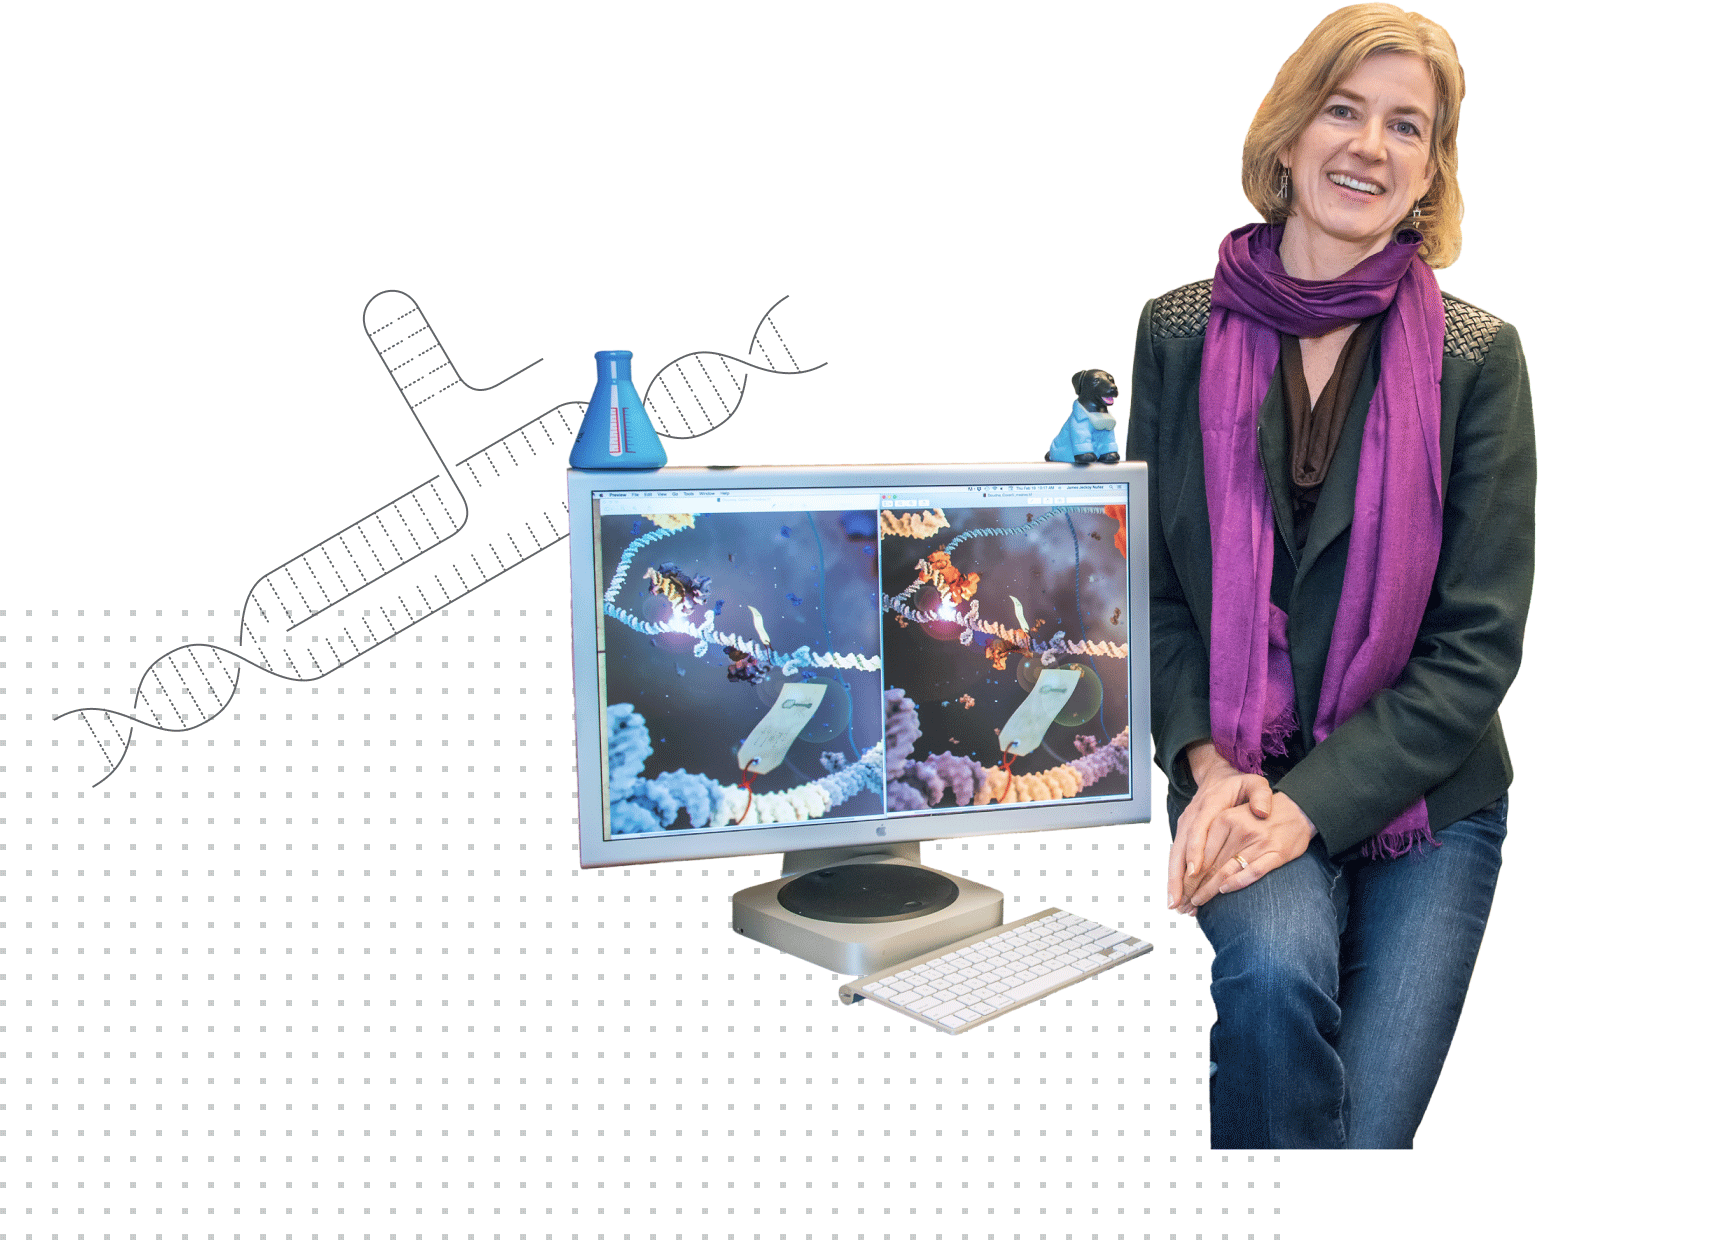 Jennifer Doudna, a blonde-haired person wearing a dark blouse and purple scarf, seated next to a computer showing a scientific model.